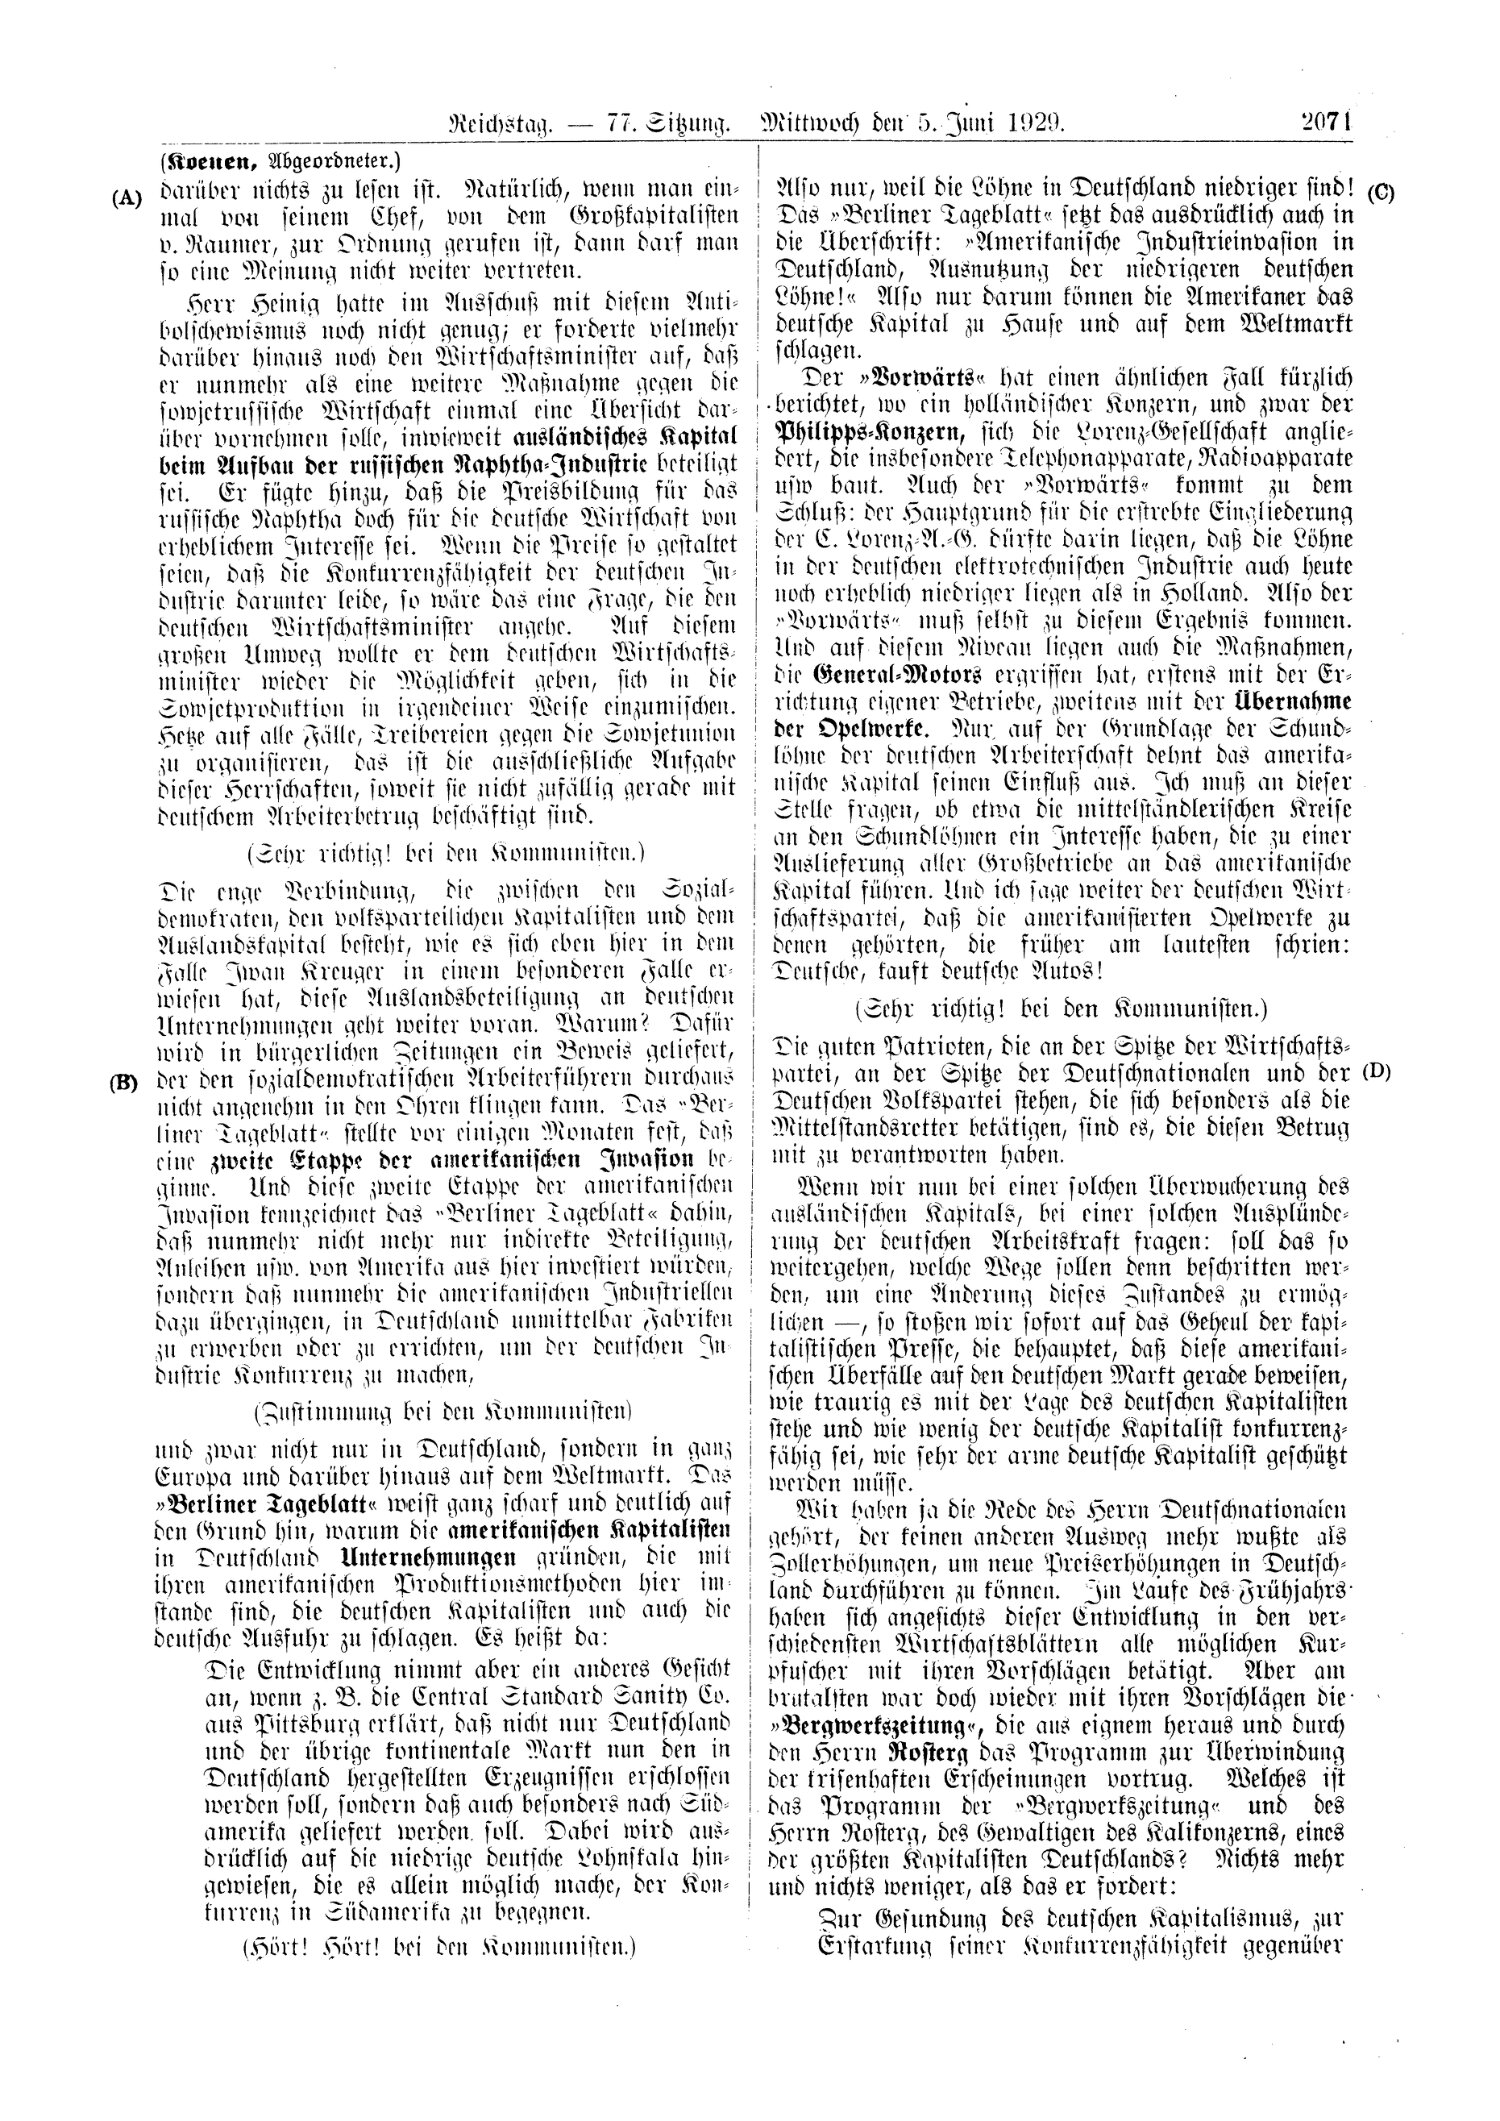 Scan of page 2071